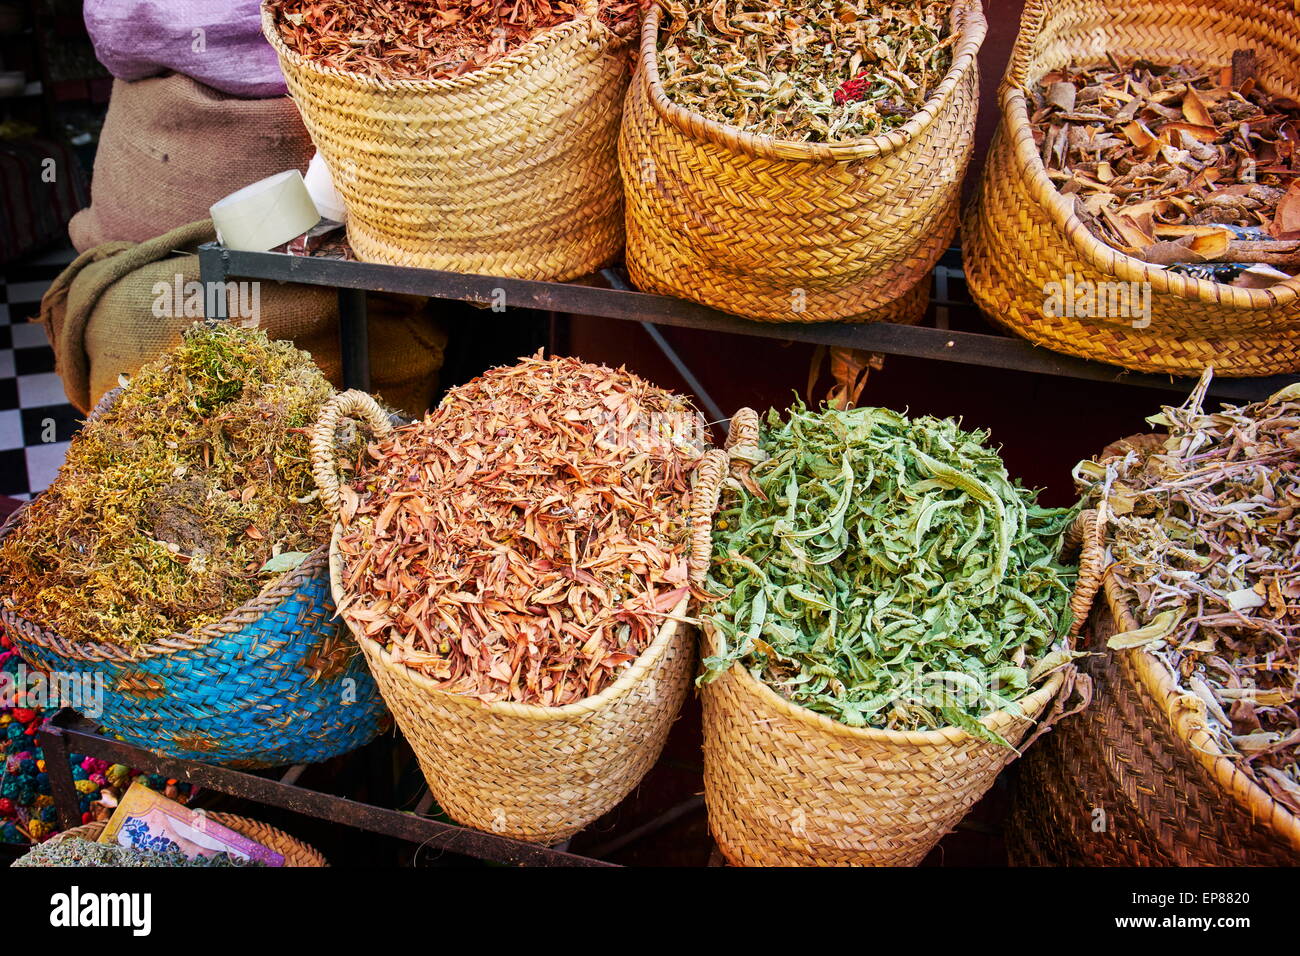 Baskets of dried spices, buds and herbs in the souk. Morocco Stock Photo